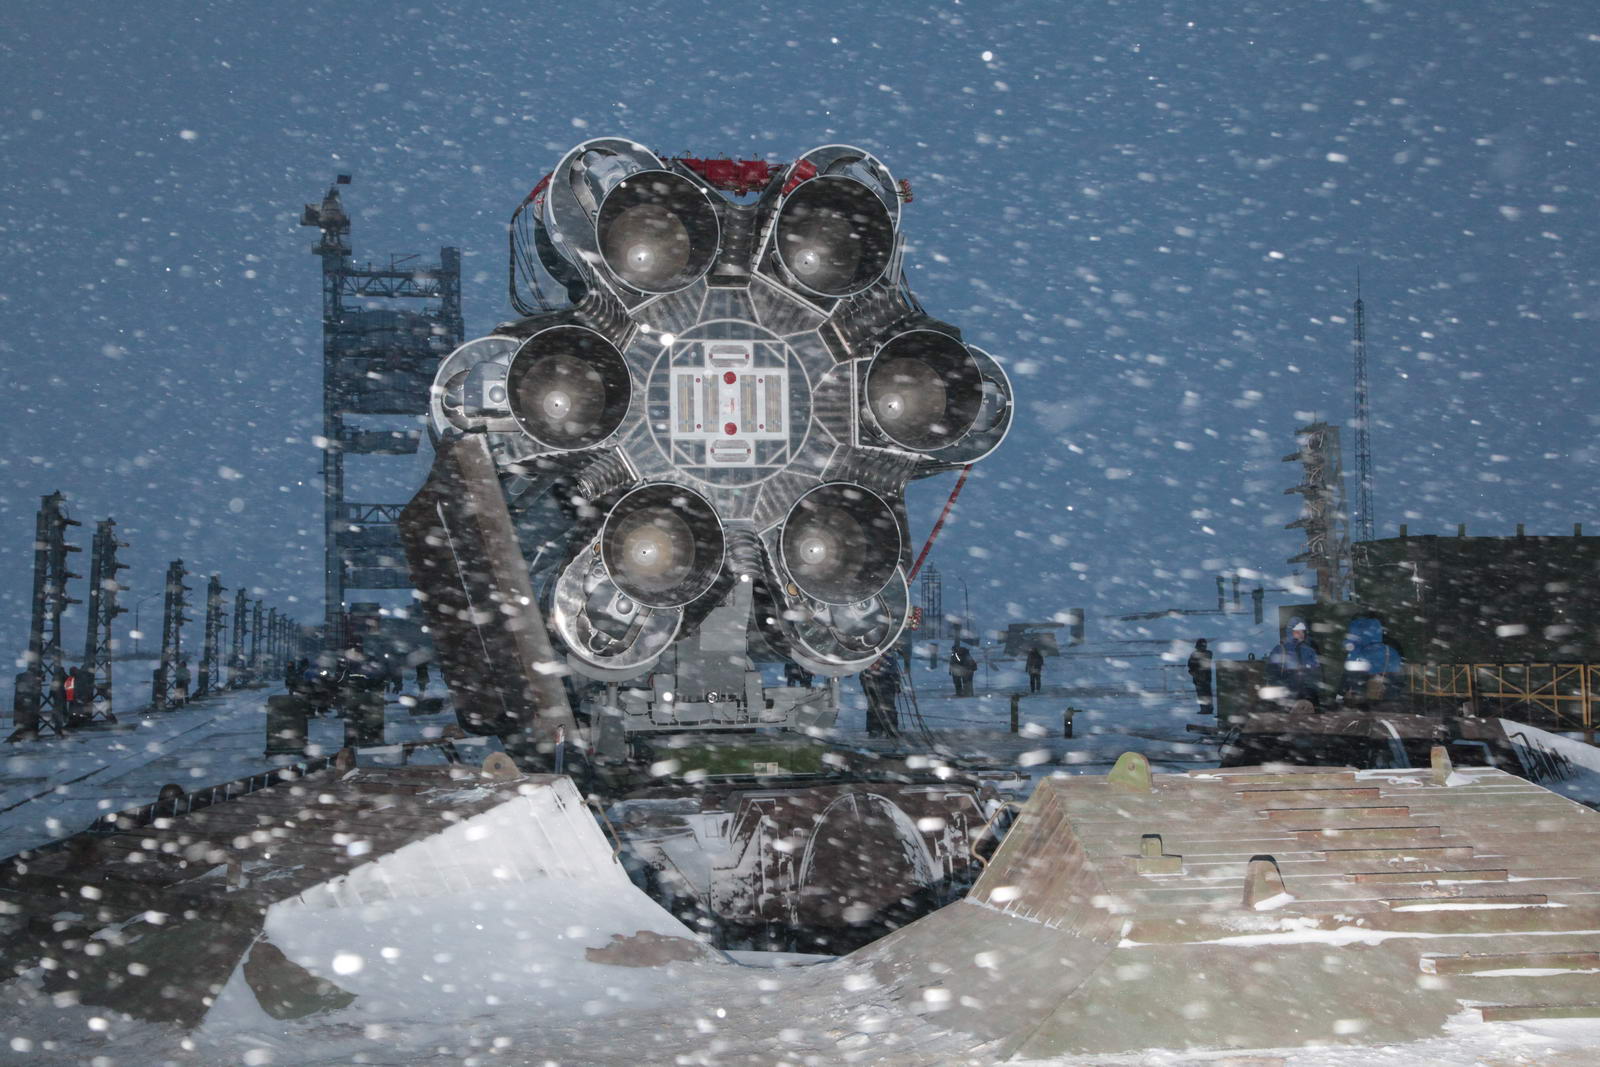 Russian Rocket Hardware Looks Even More Badass In A Blizzard